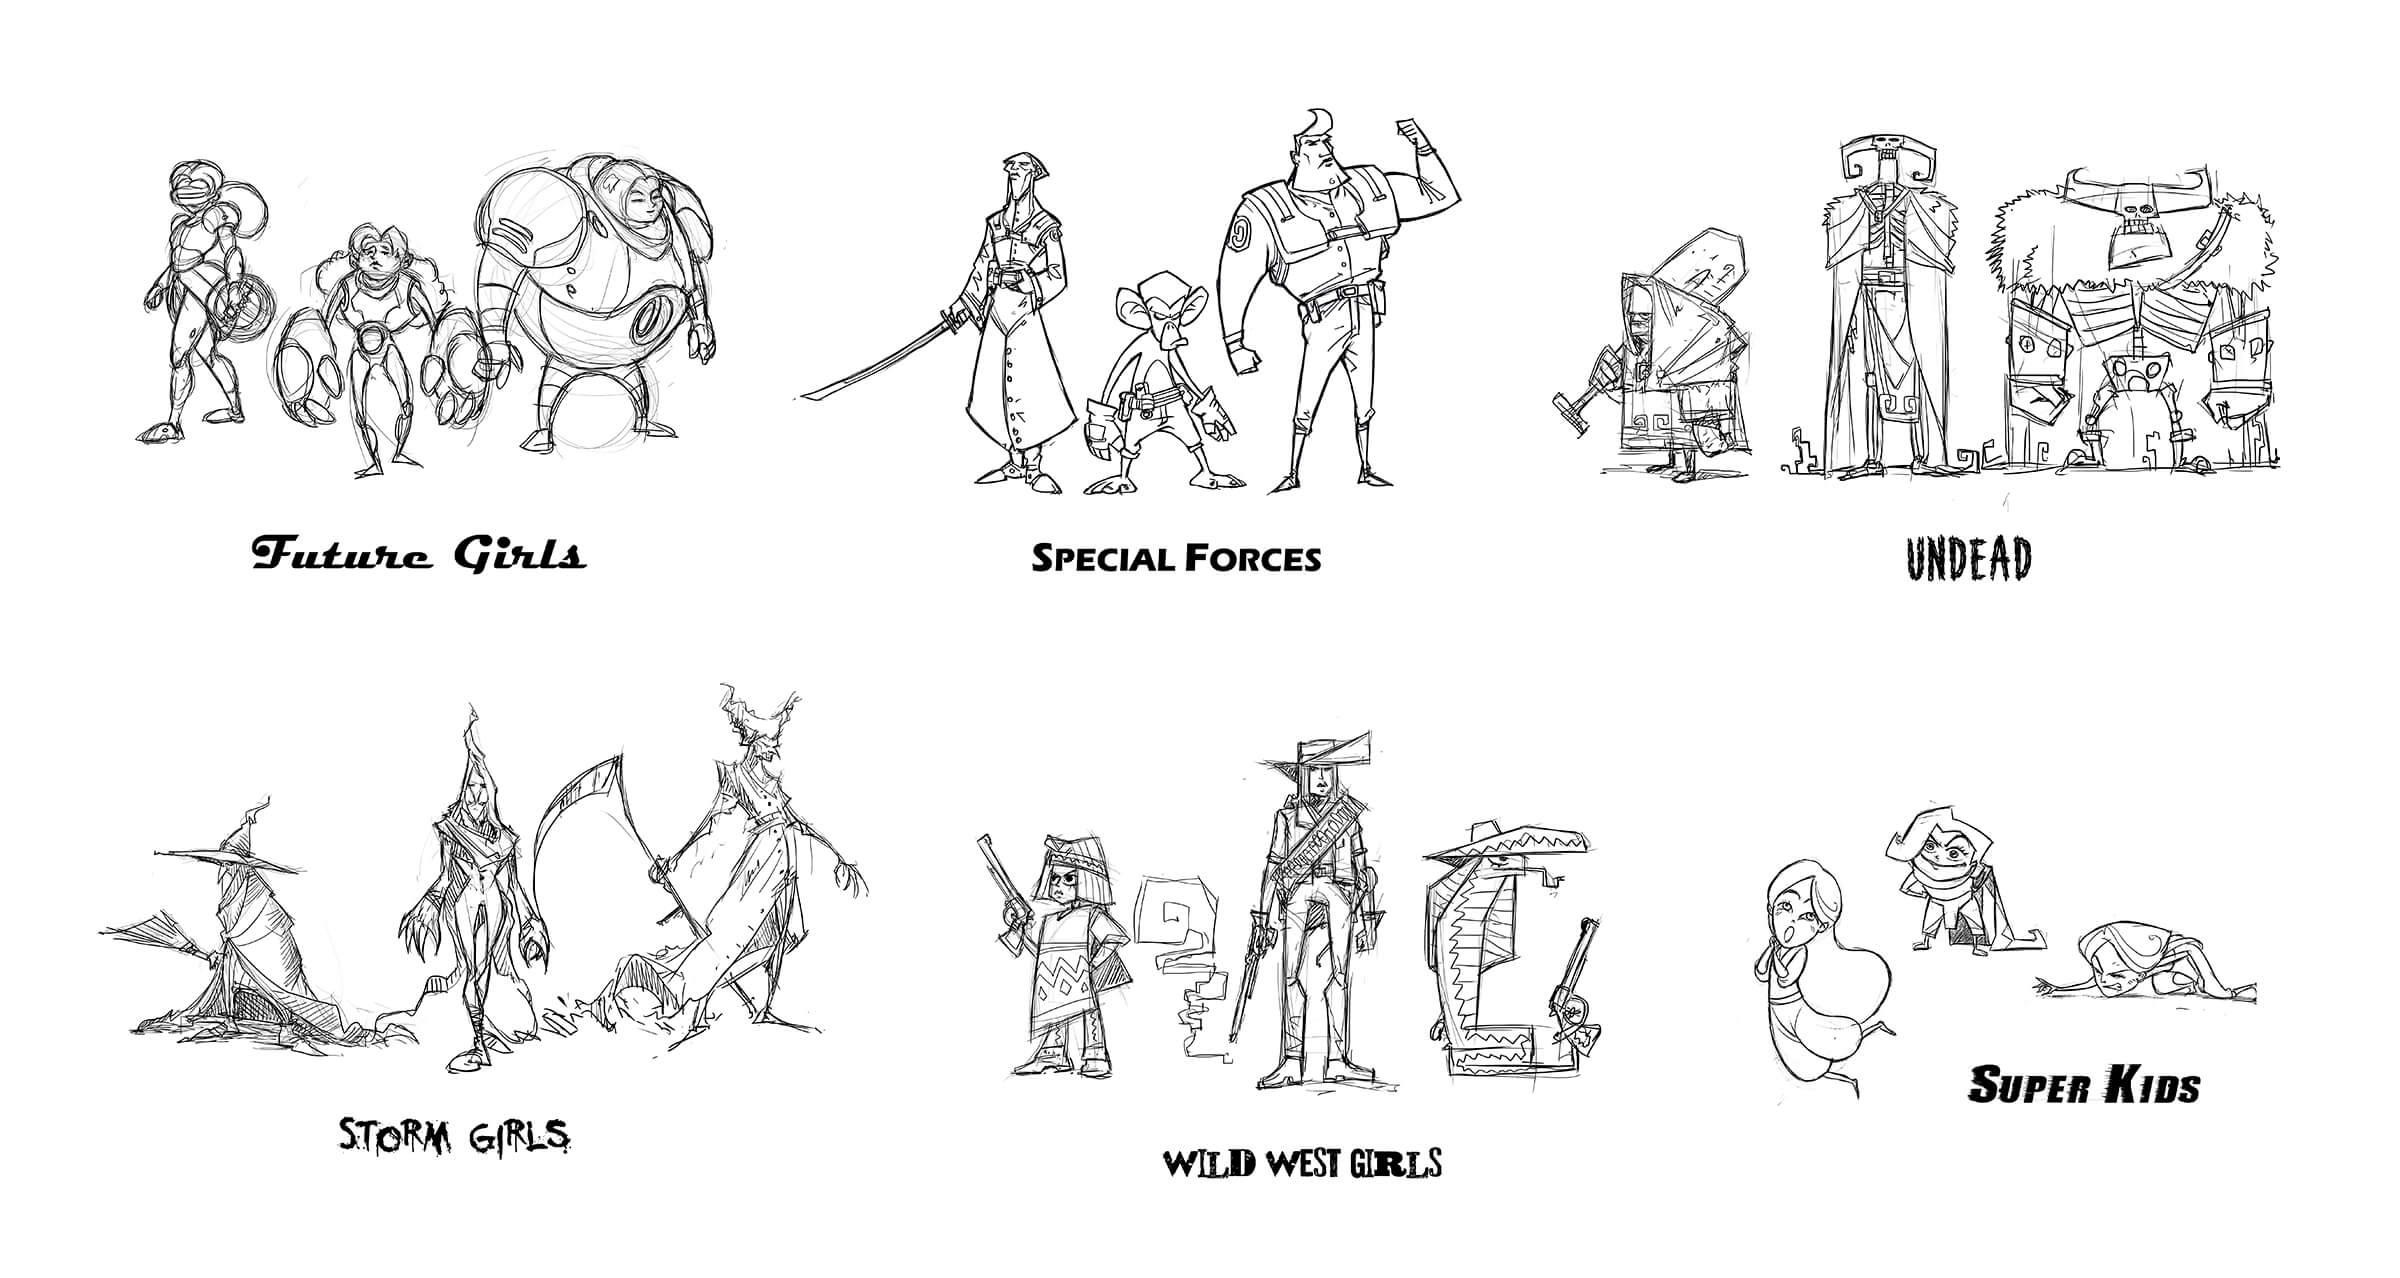 Sketches of 6 groups of combatants each in categories such as Undead, Super Kids, Wild West Girls, and Special Forces.